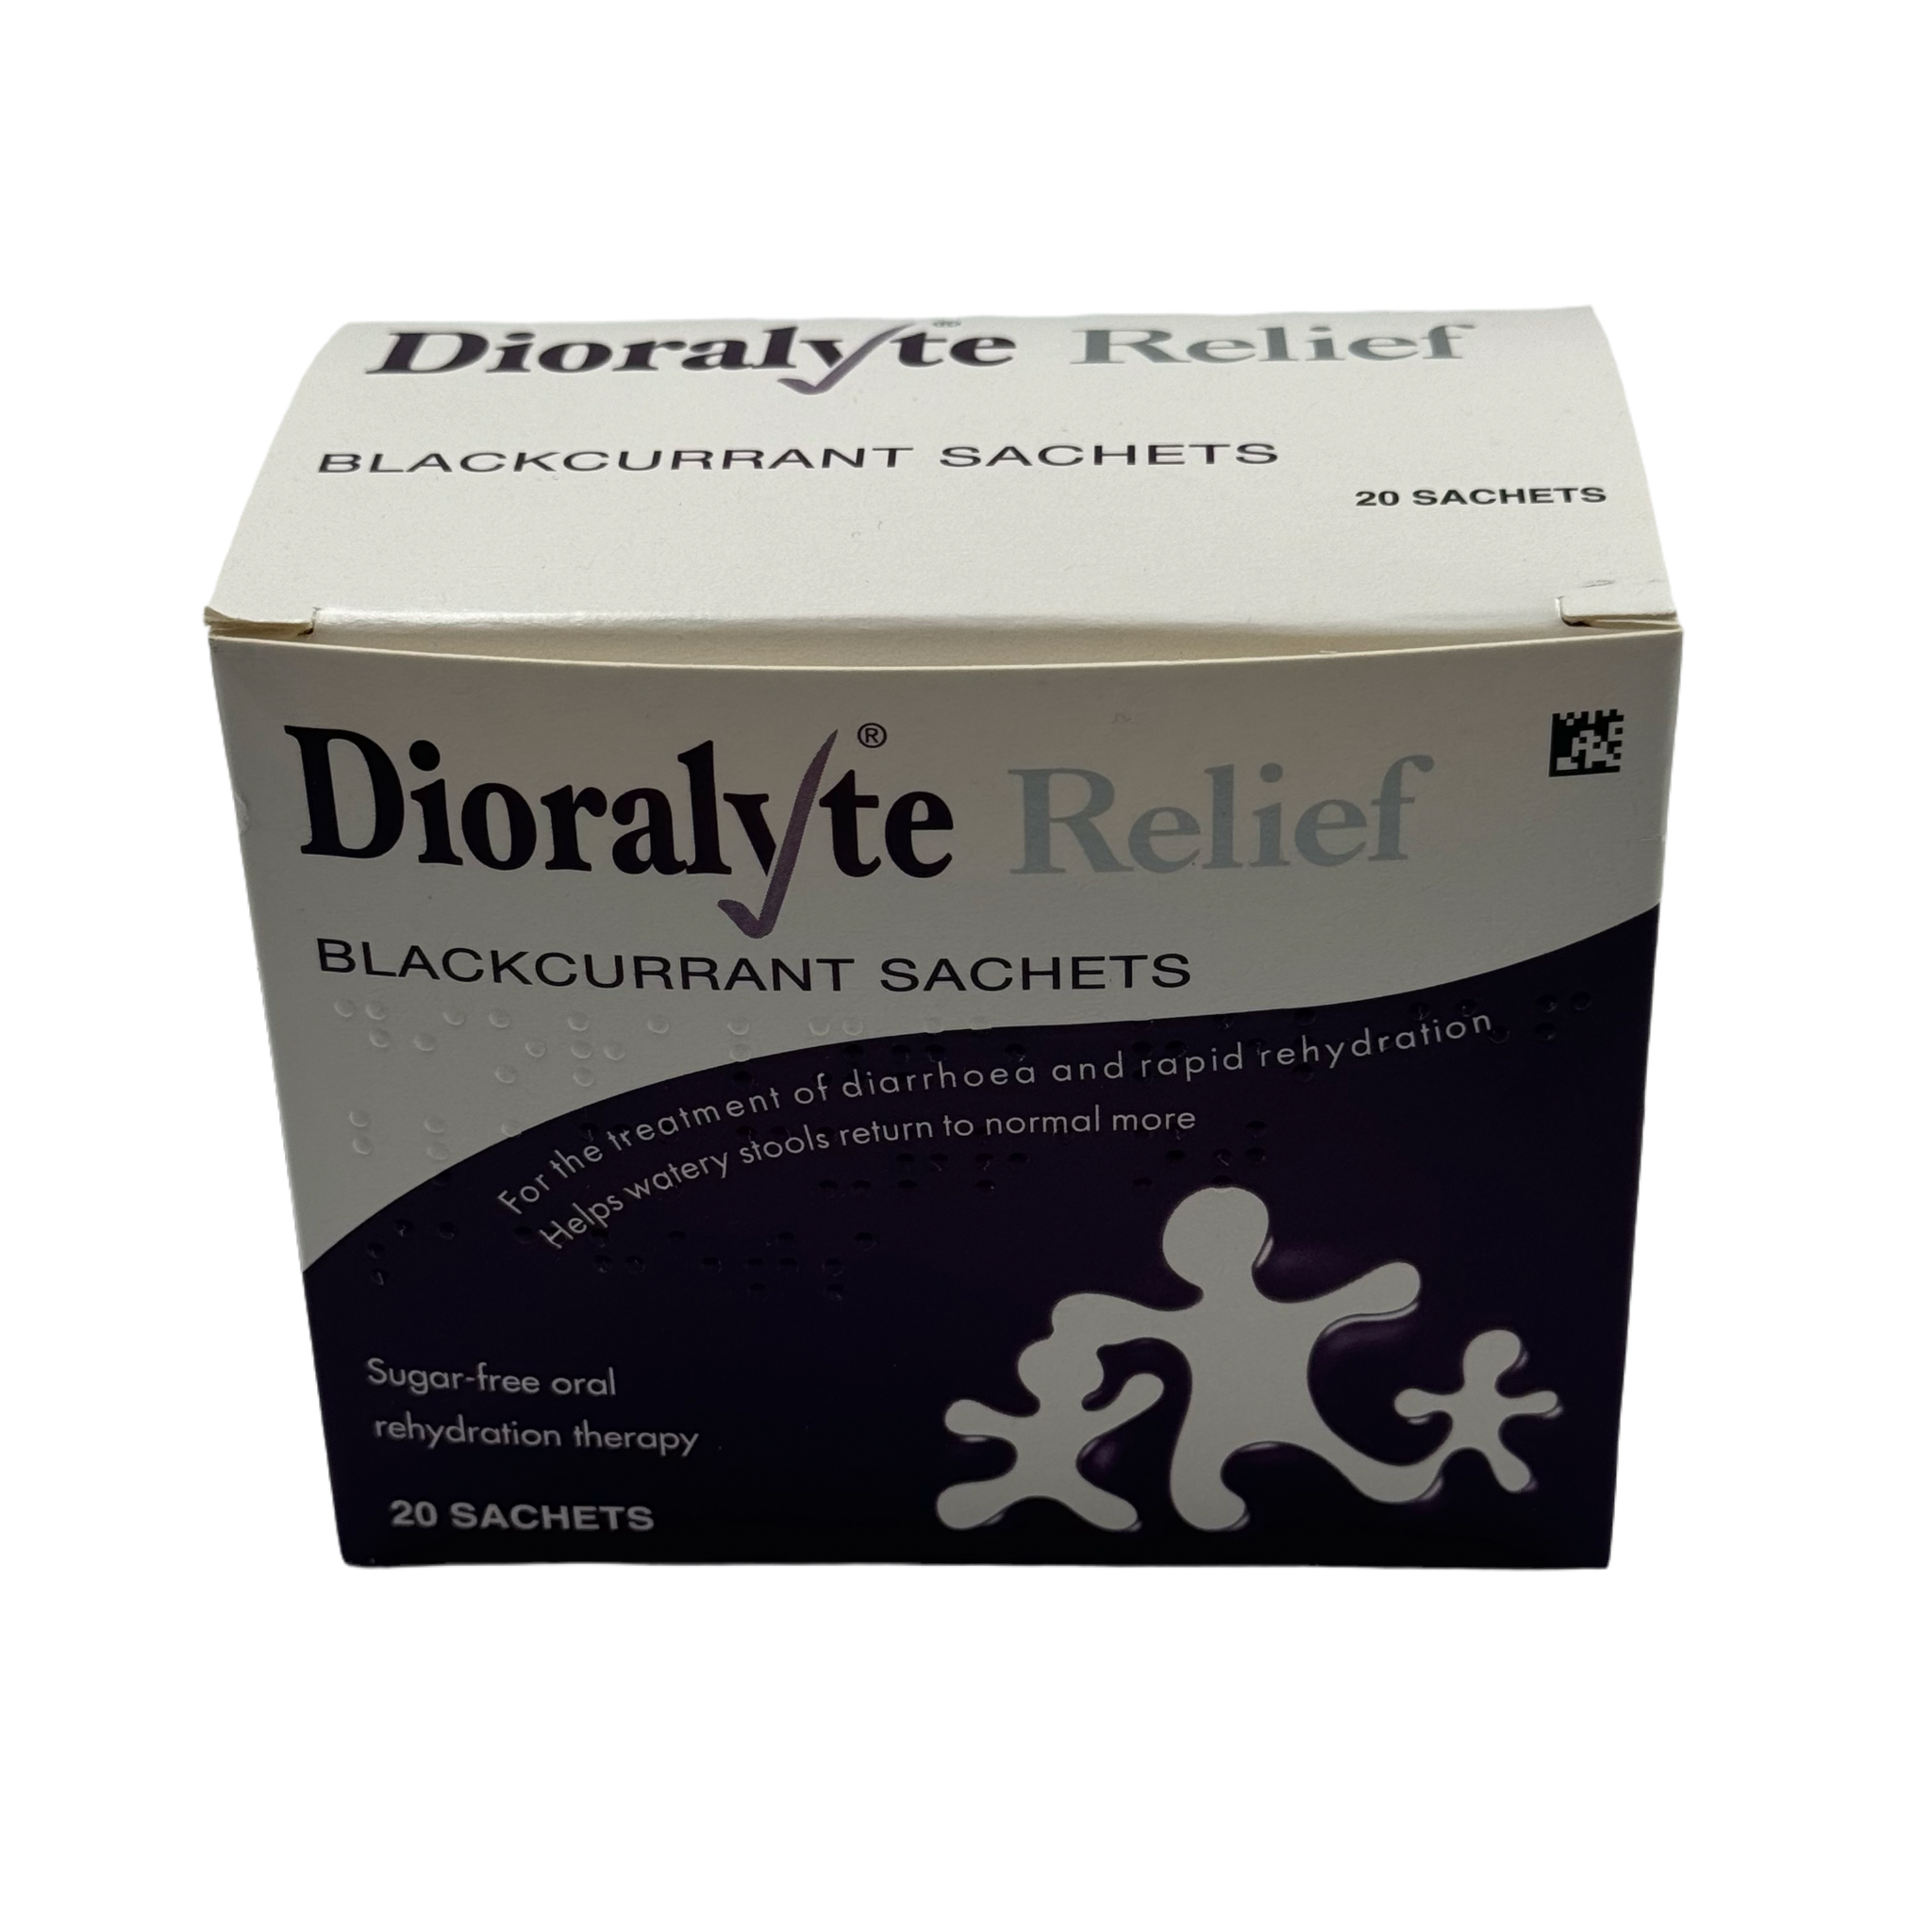 DIORALYTE RELIEF BLACKCURRANT SACHETS (20)